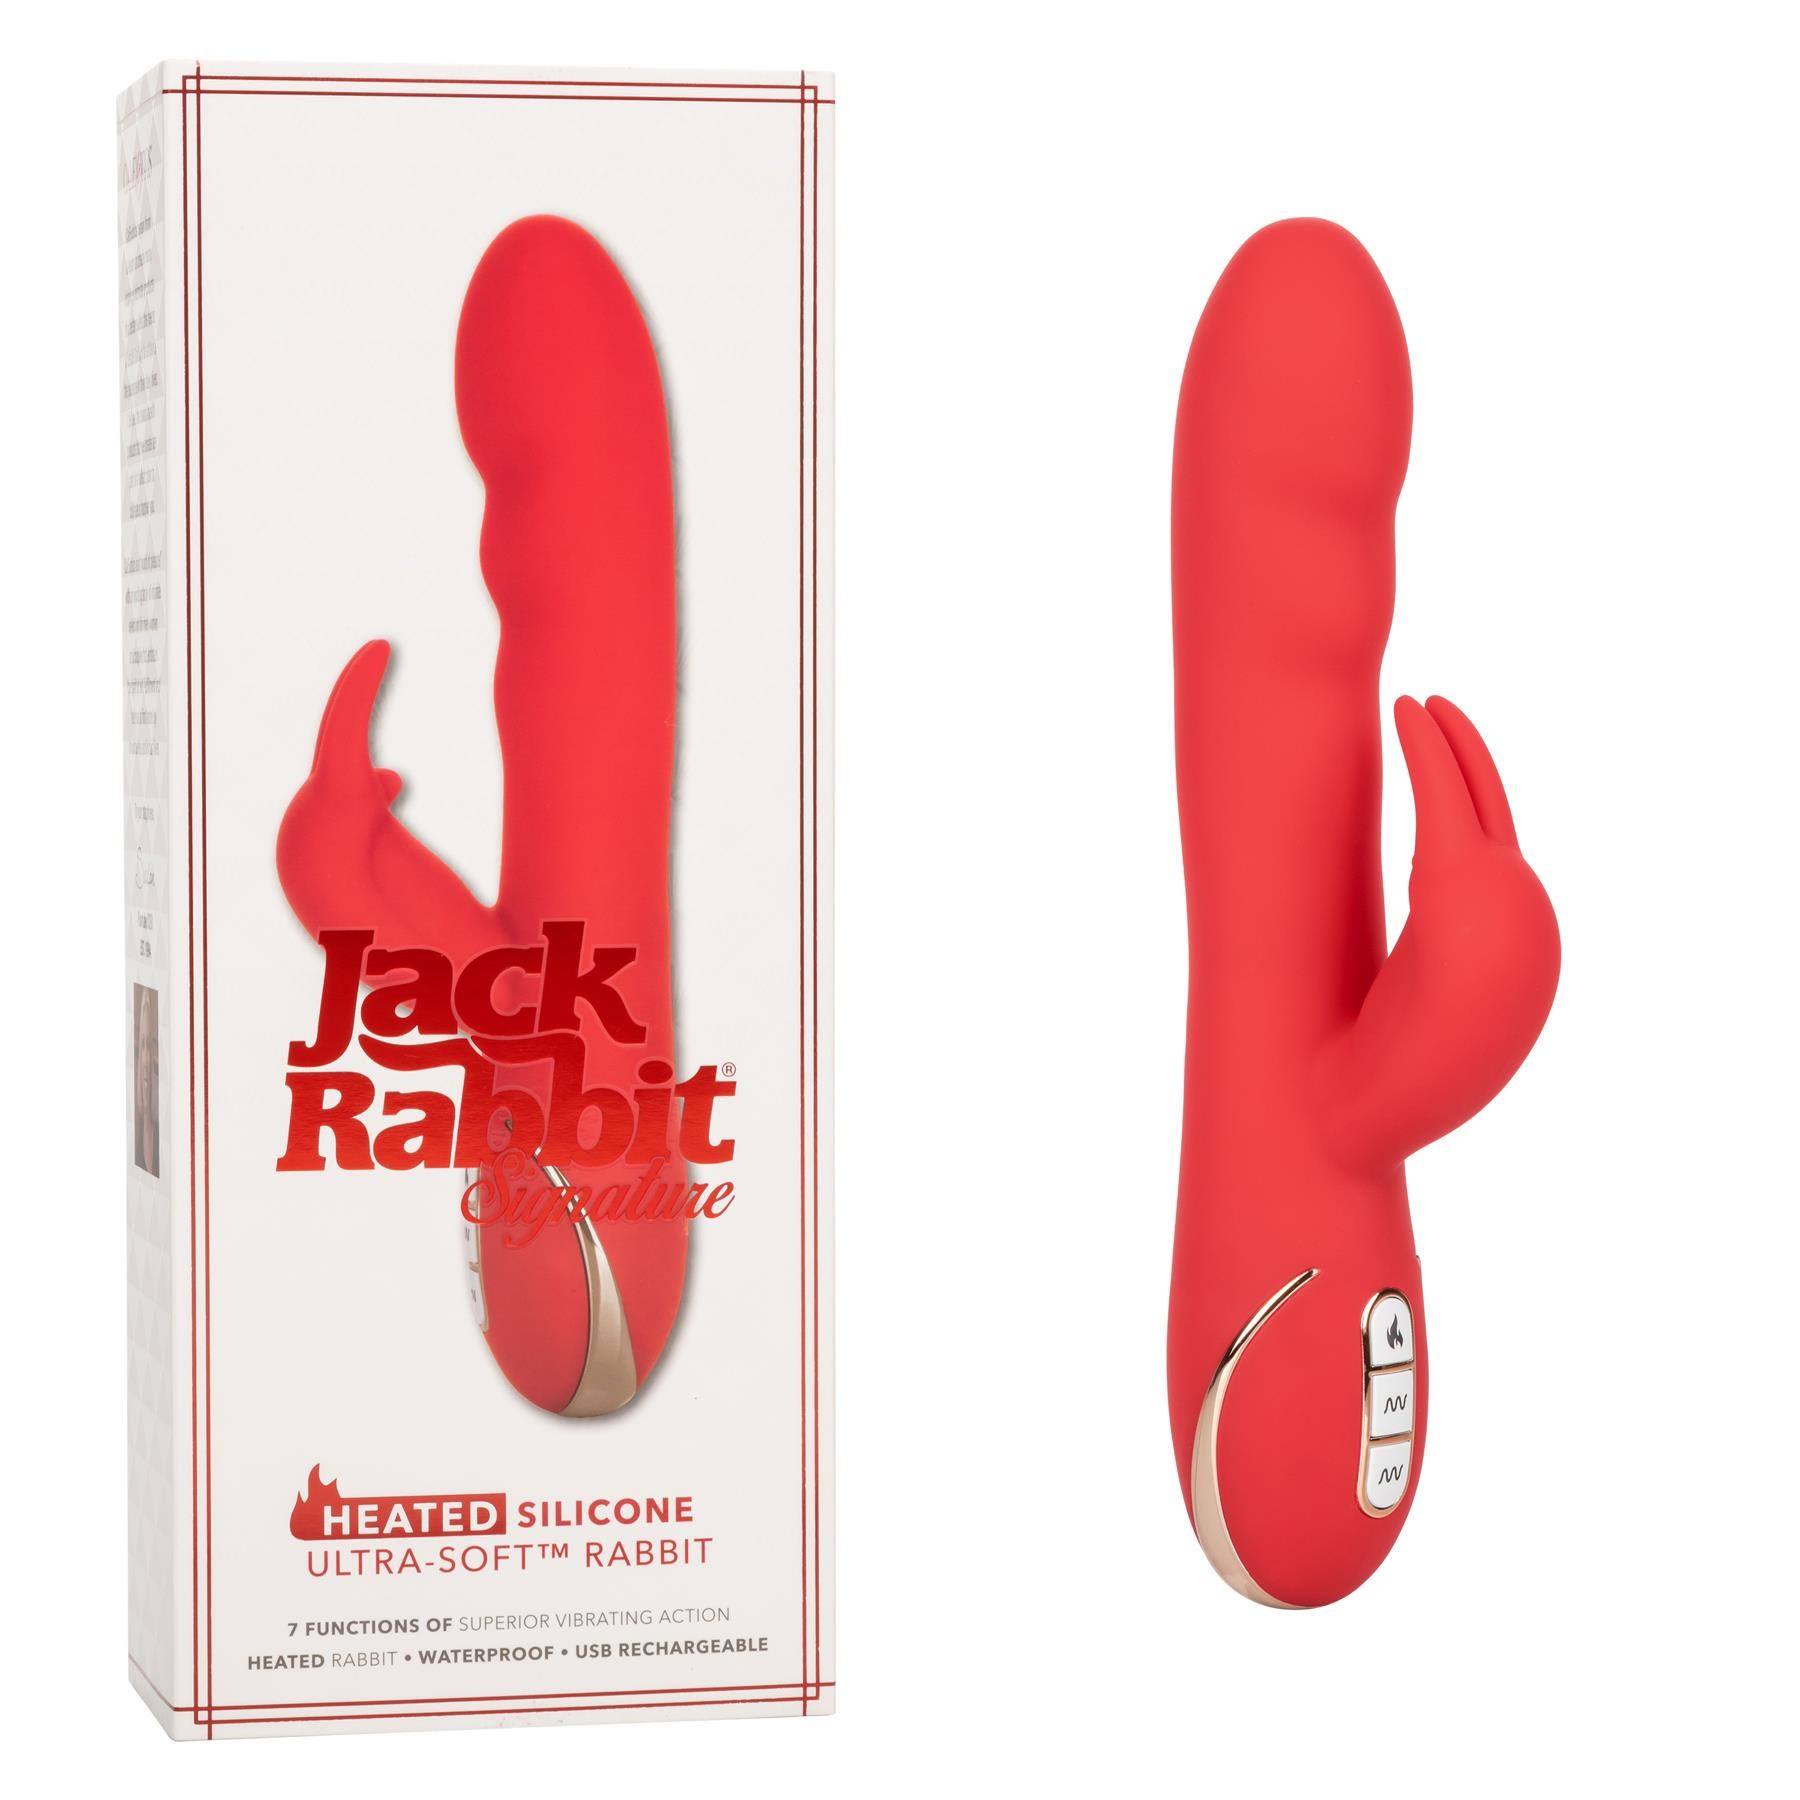 Jack Rabbit Heated Ultra-Soft Rabbit- Product and Packaging